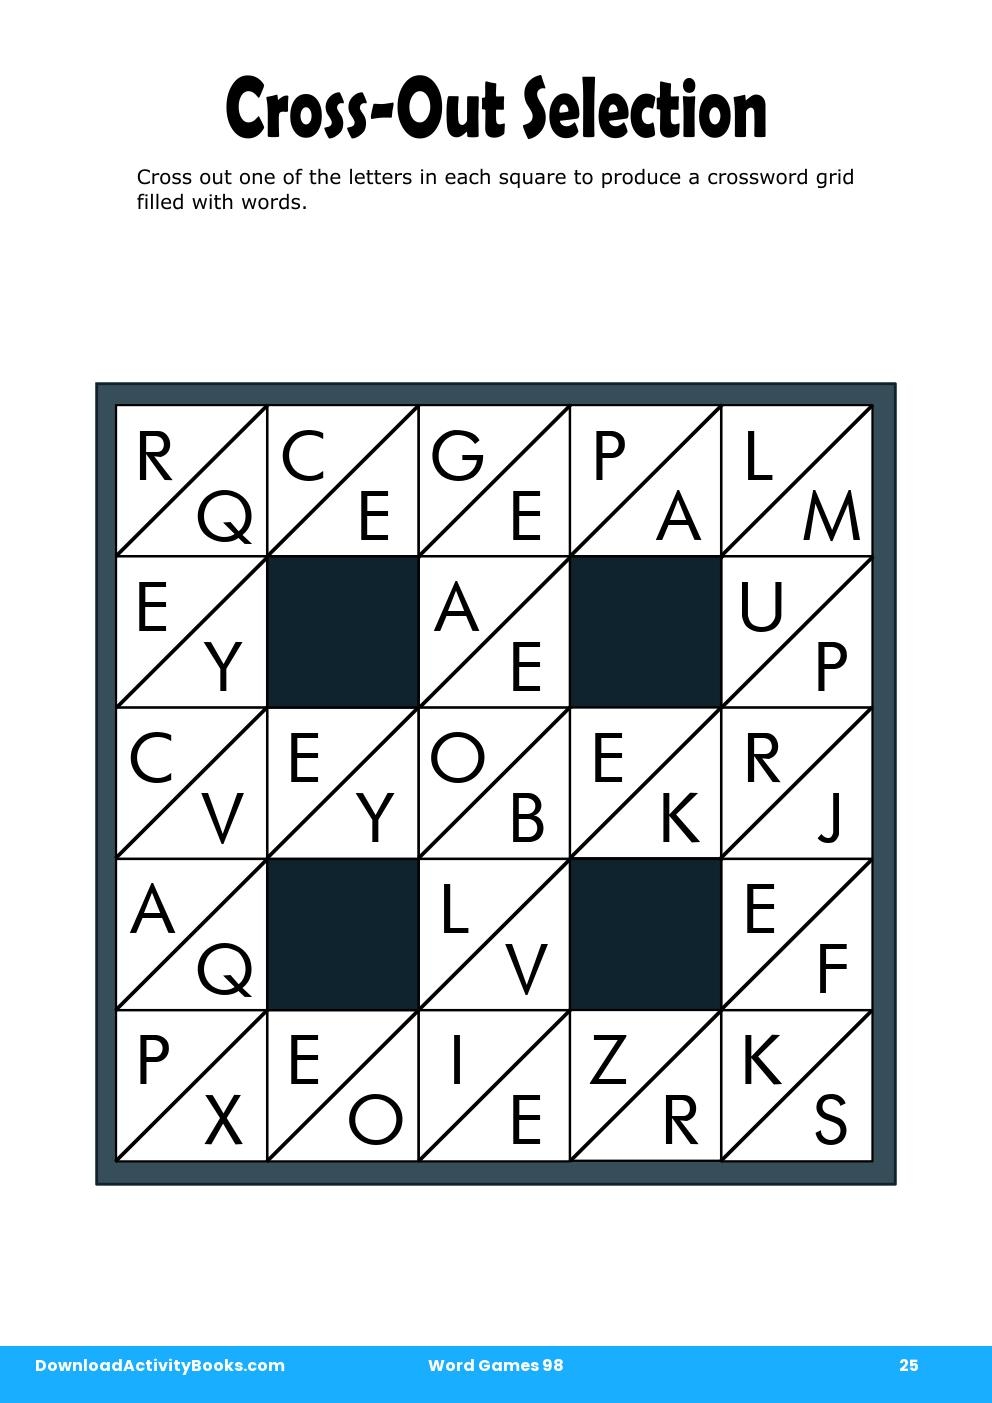 Cross-Out Selection in Word Games 98